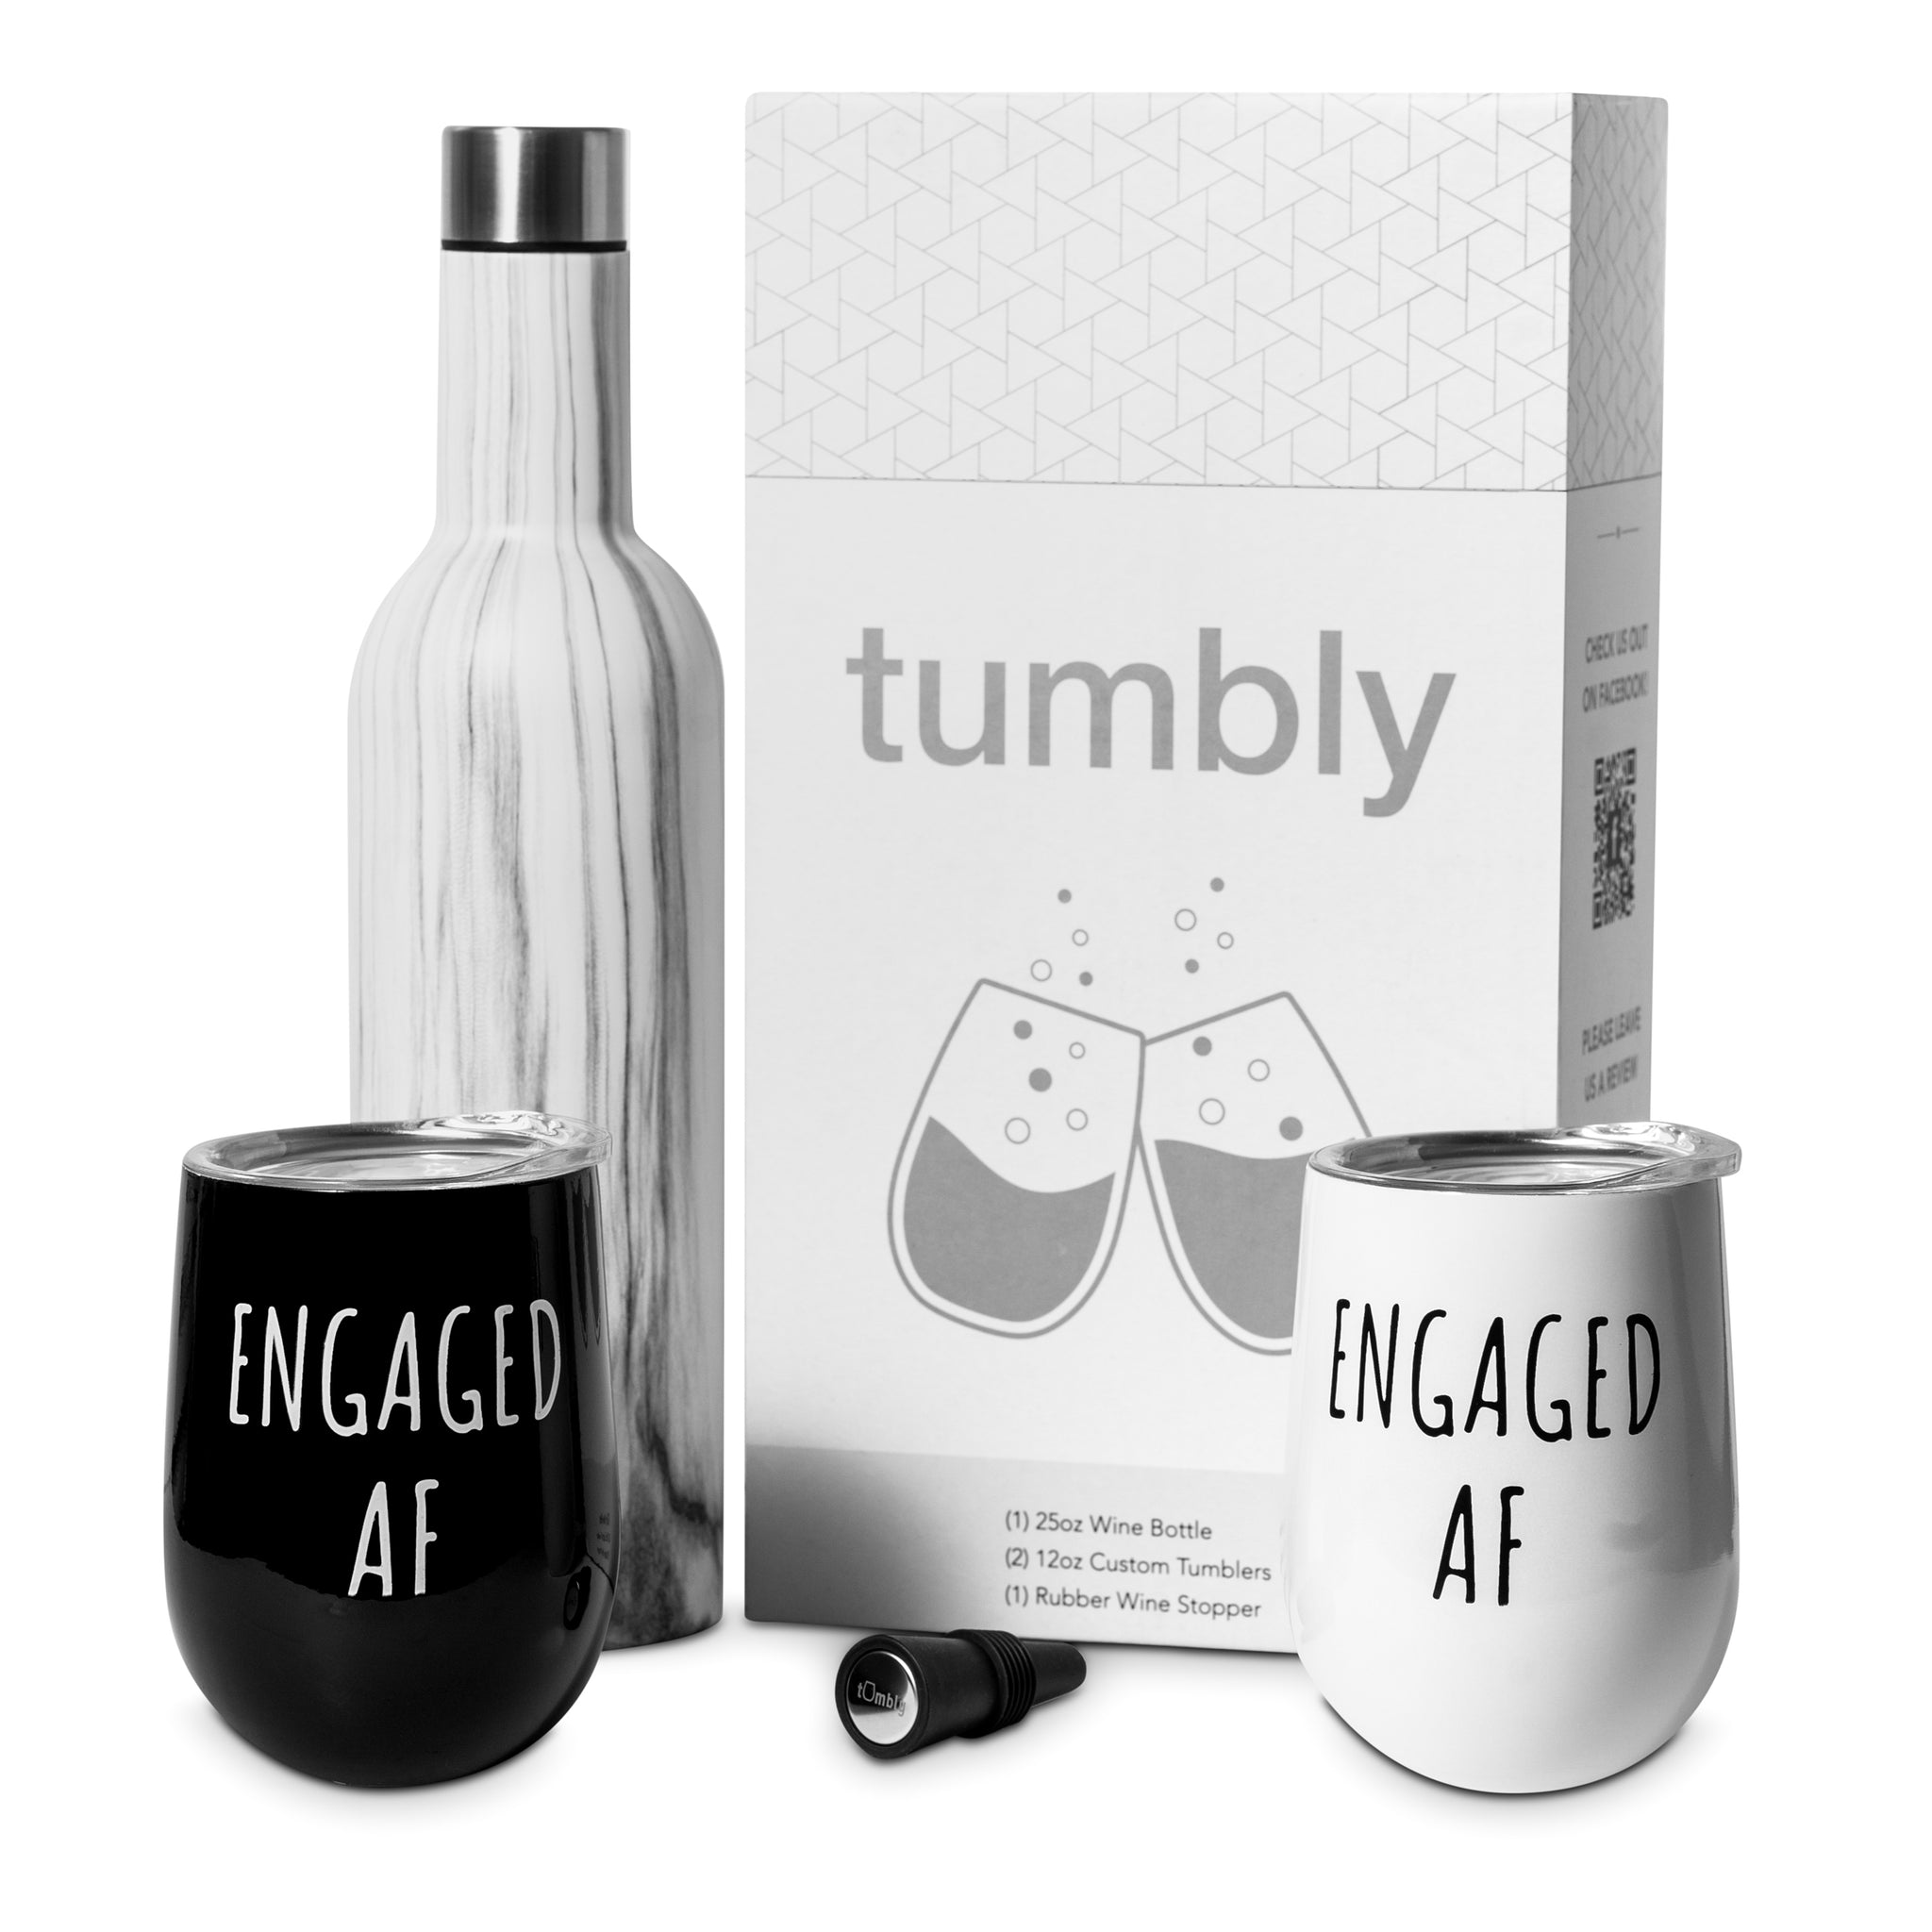 Engaged AF - Engagement Gifts for Women, Engaged Gifts for Her, Fiance –  Tumbly Gifts